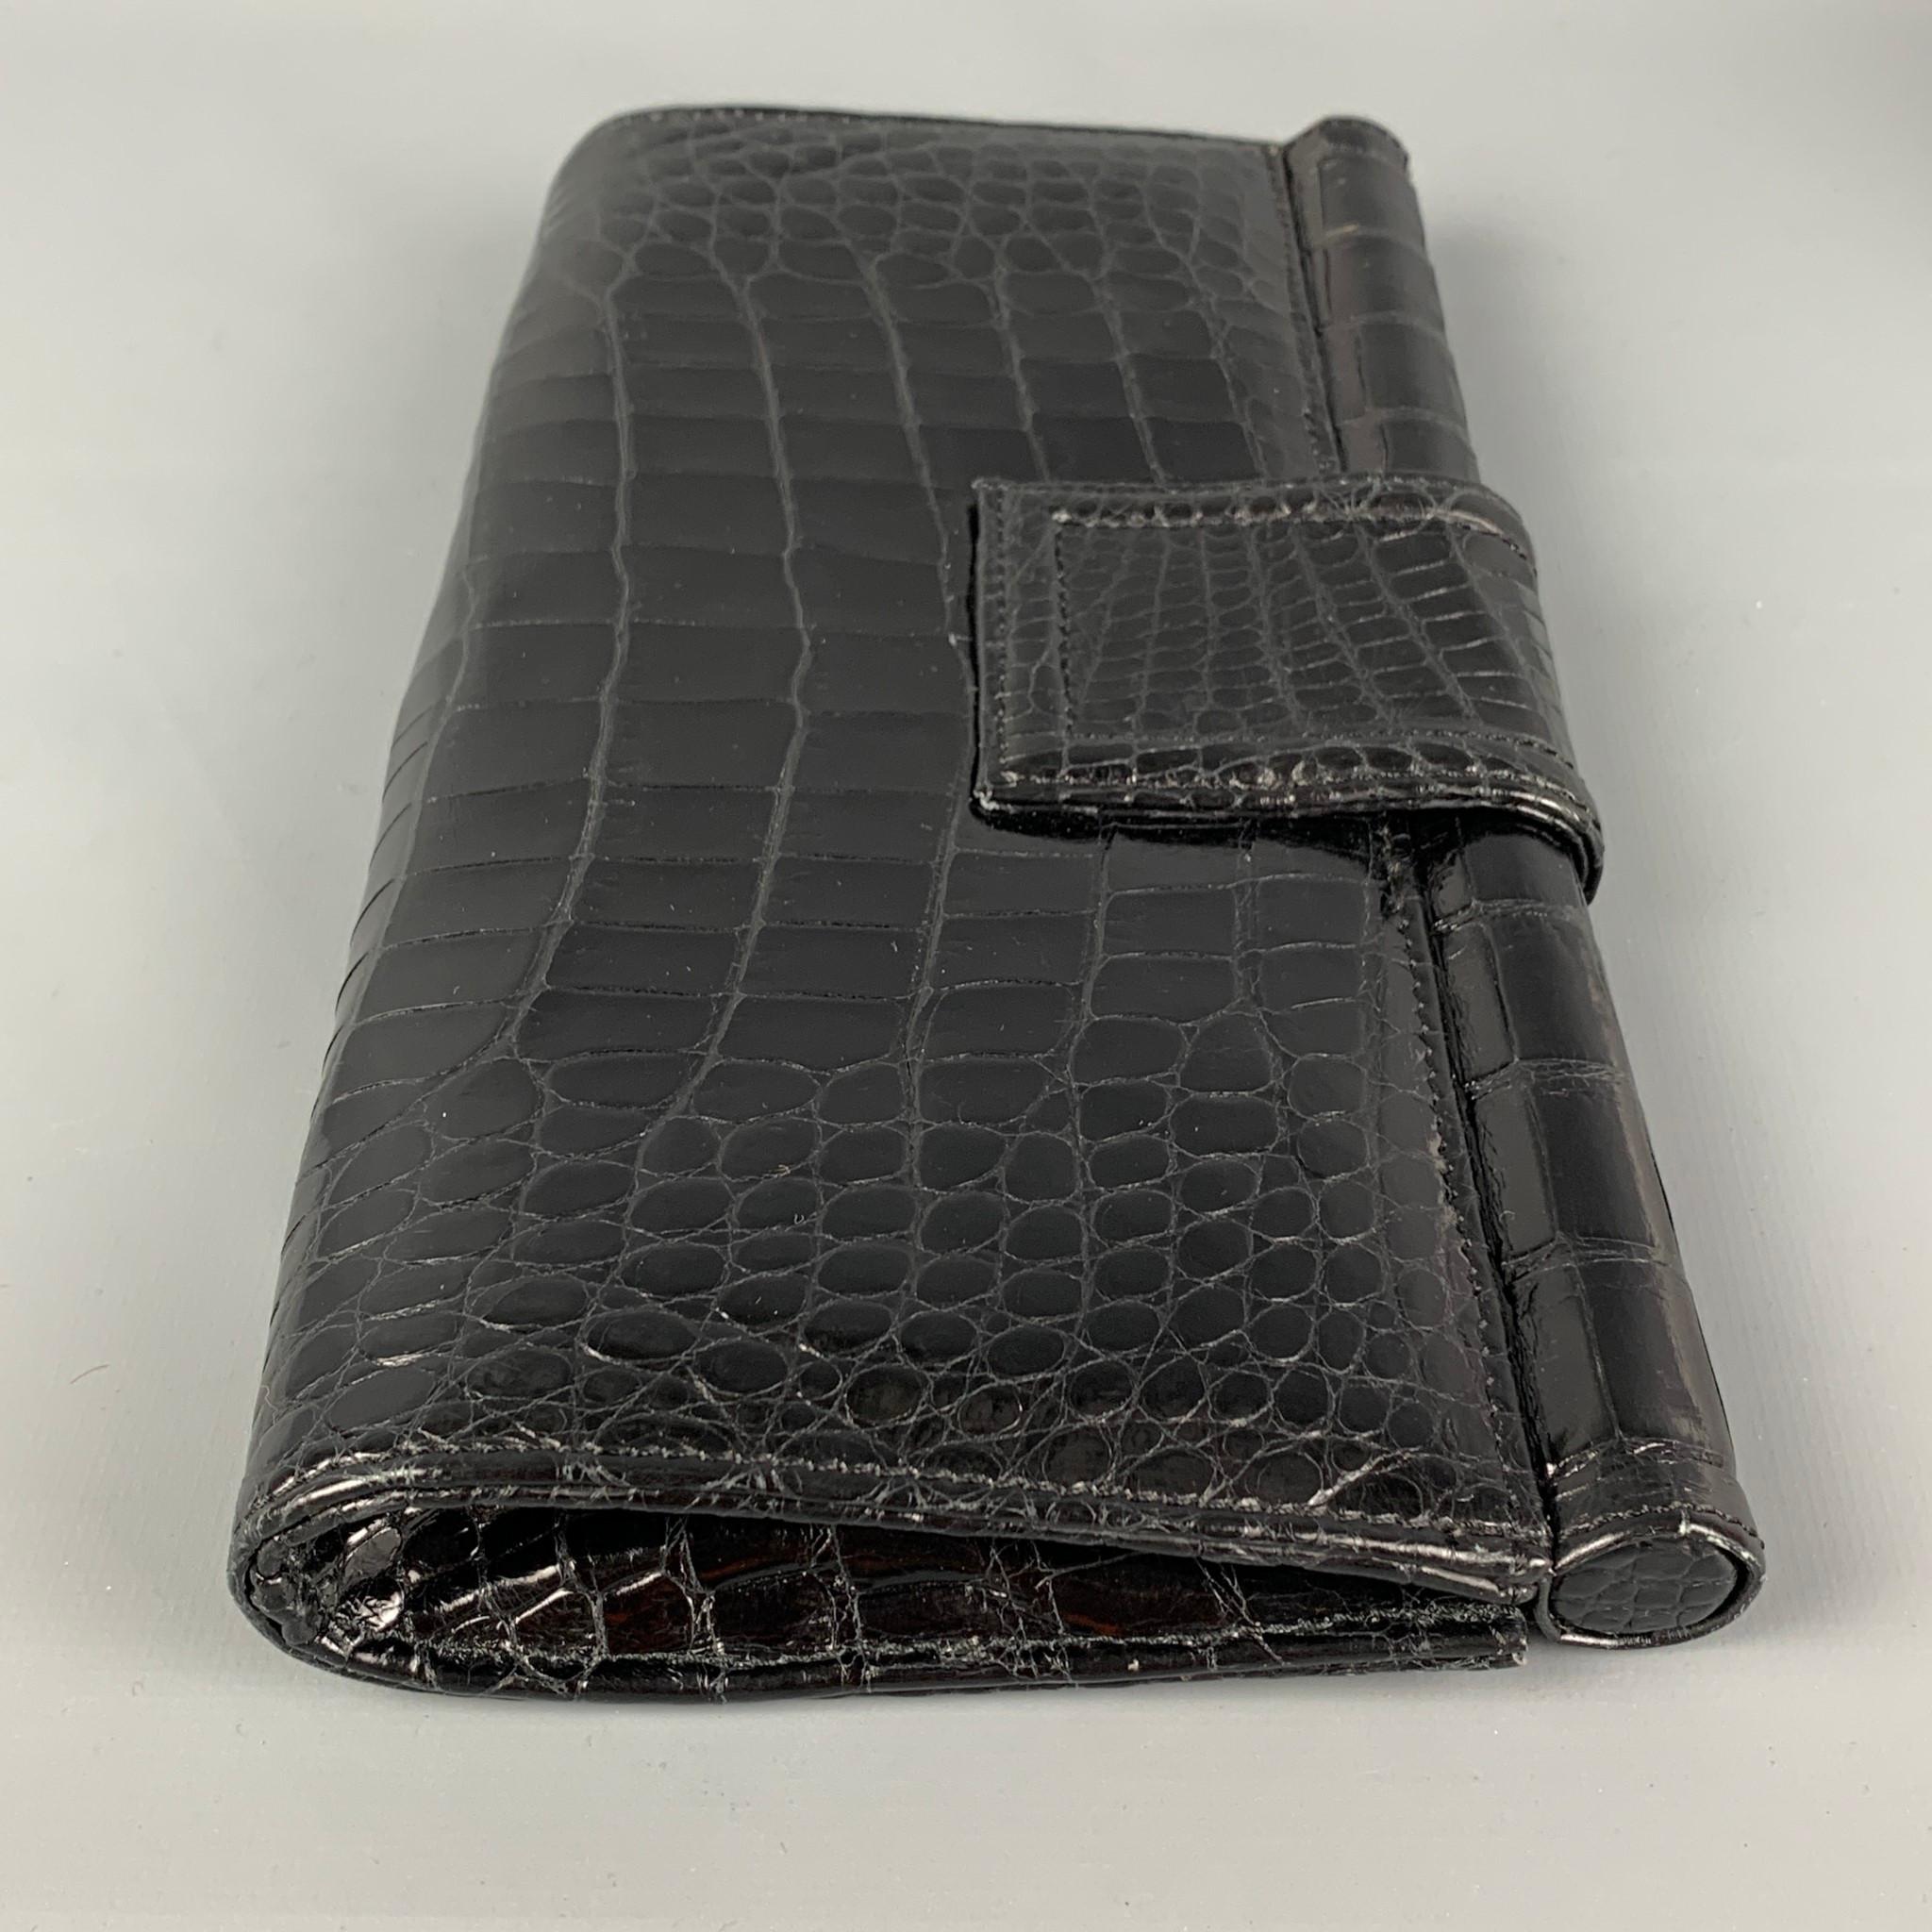 VINTAGE clutch comes in a black crocodile leather featuring a inner pocket and a magnetic closure. 

Good Pre-Owned Condition.

Measurements:

Length: 9.75 in.
Height: 5.5 in.